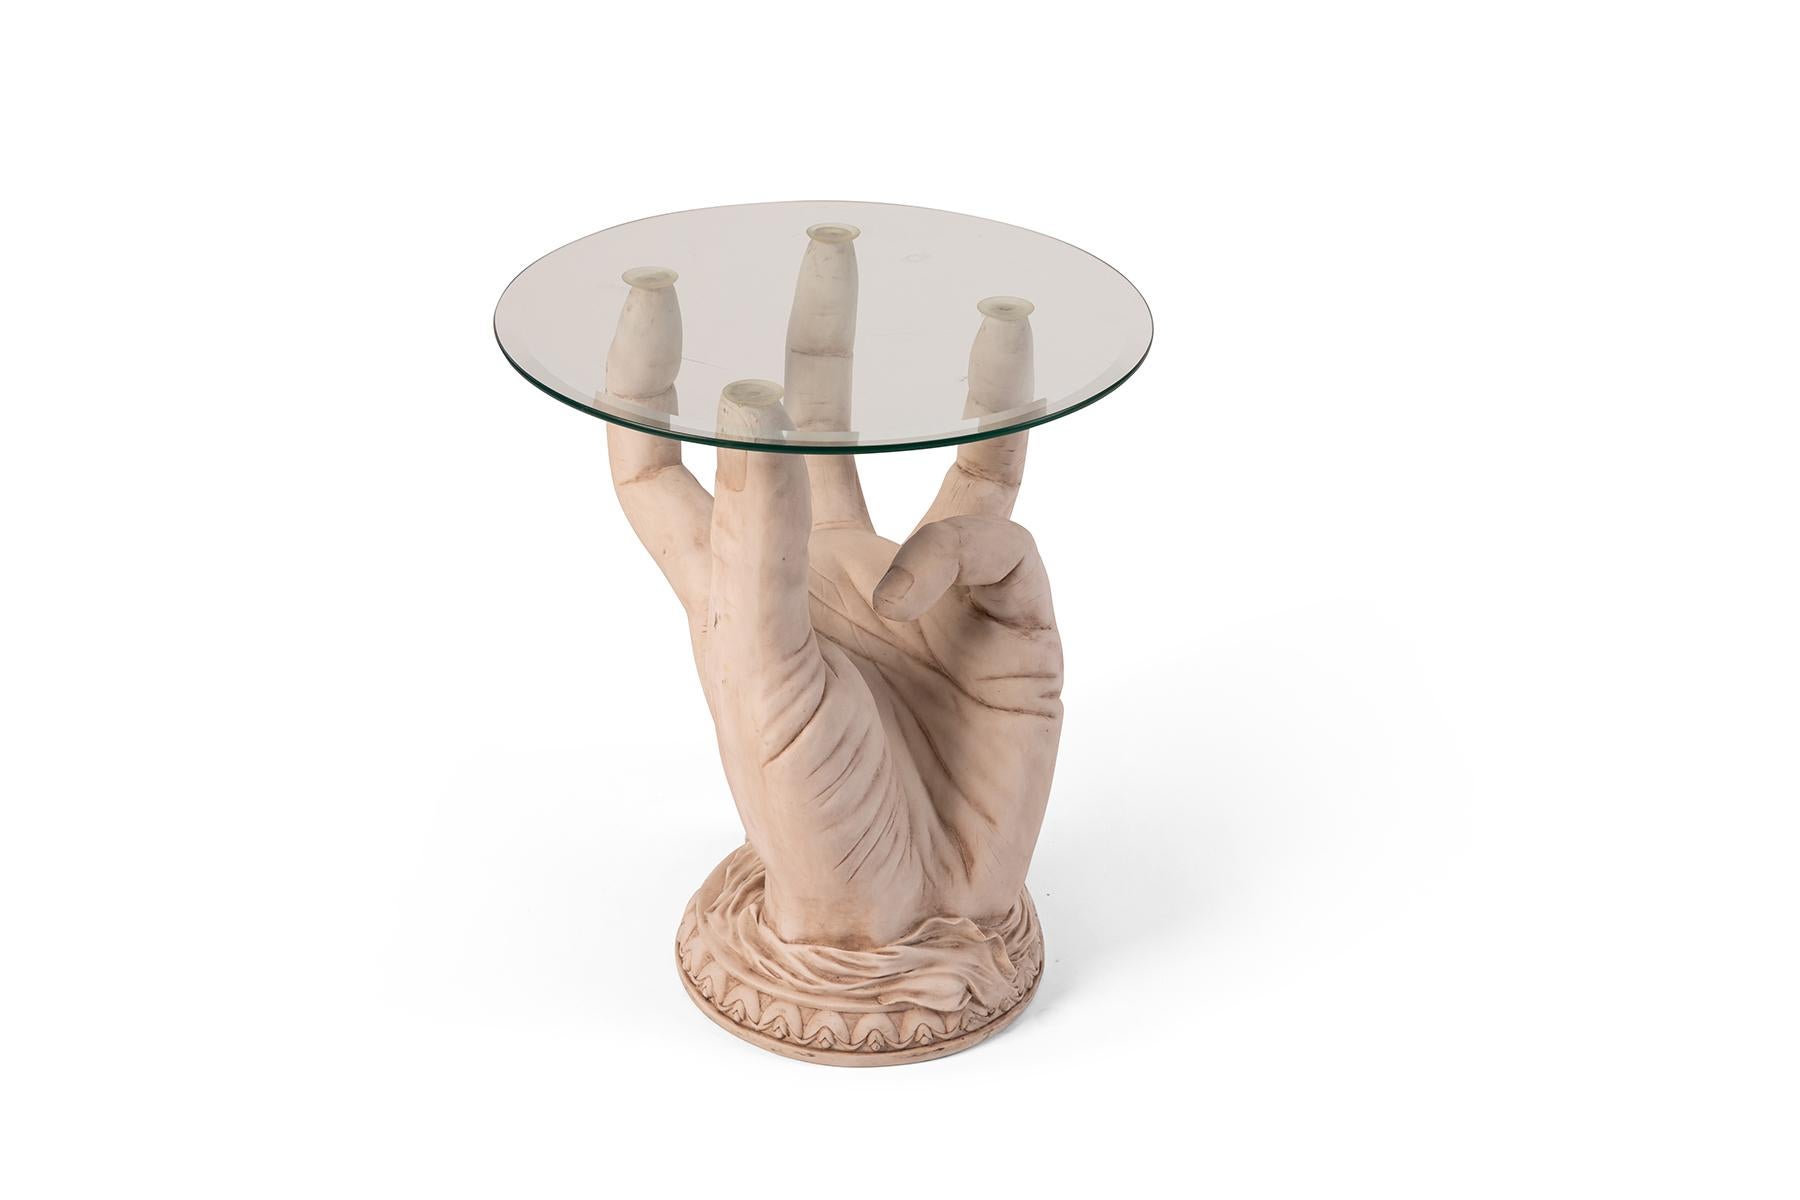 A hand sculpted from resin creates a memorable side table with a circular glass top, circa early 1970s.